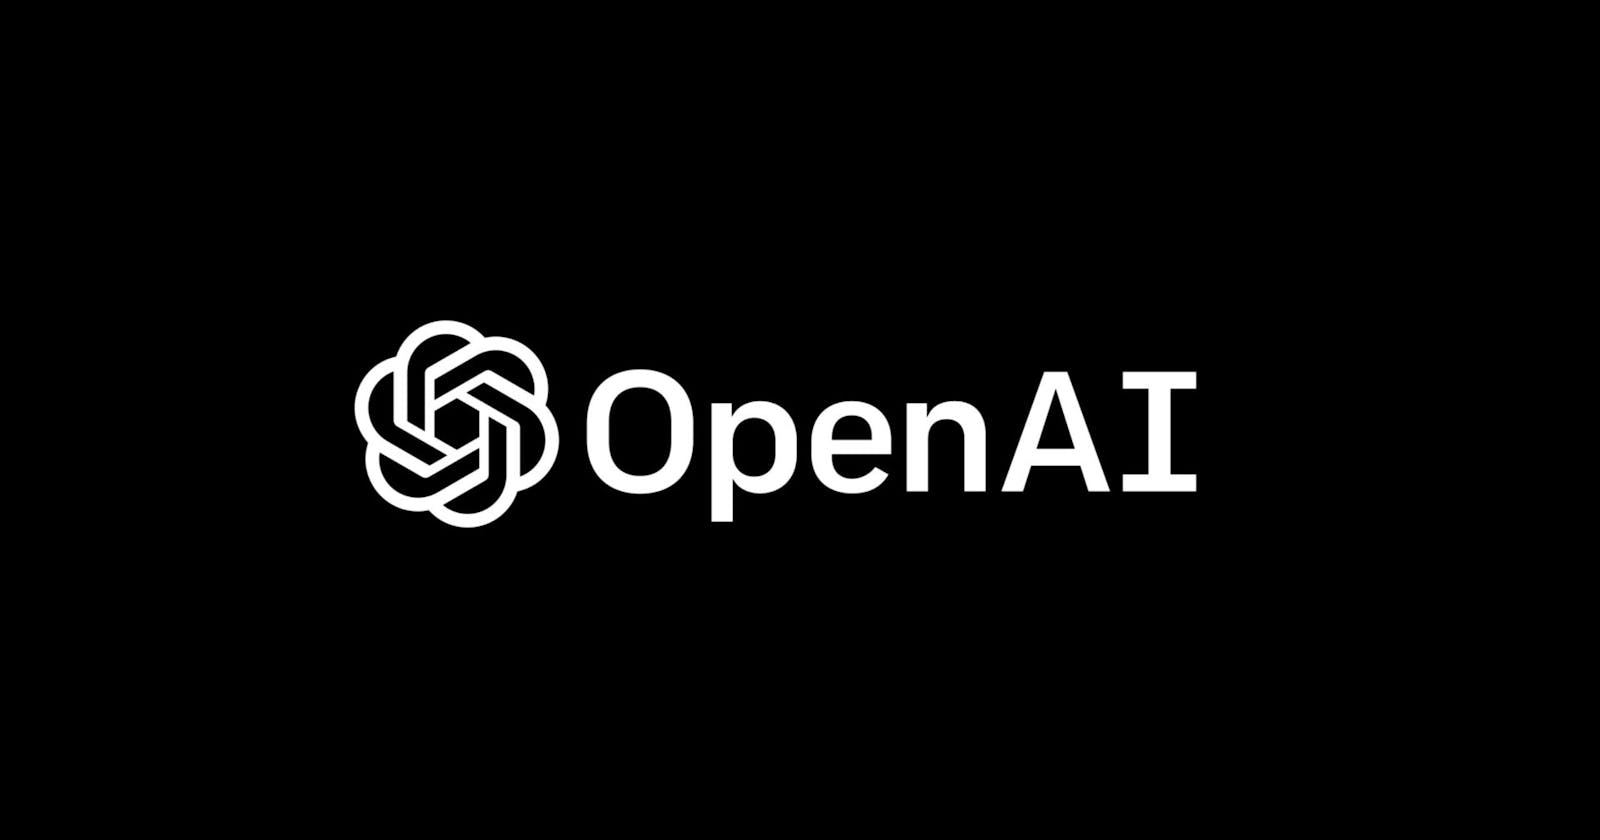 Getting started with open ai via node js